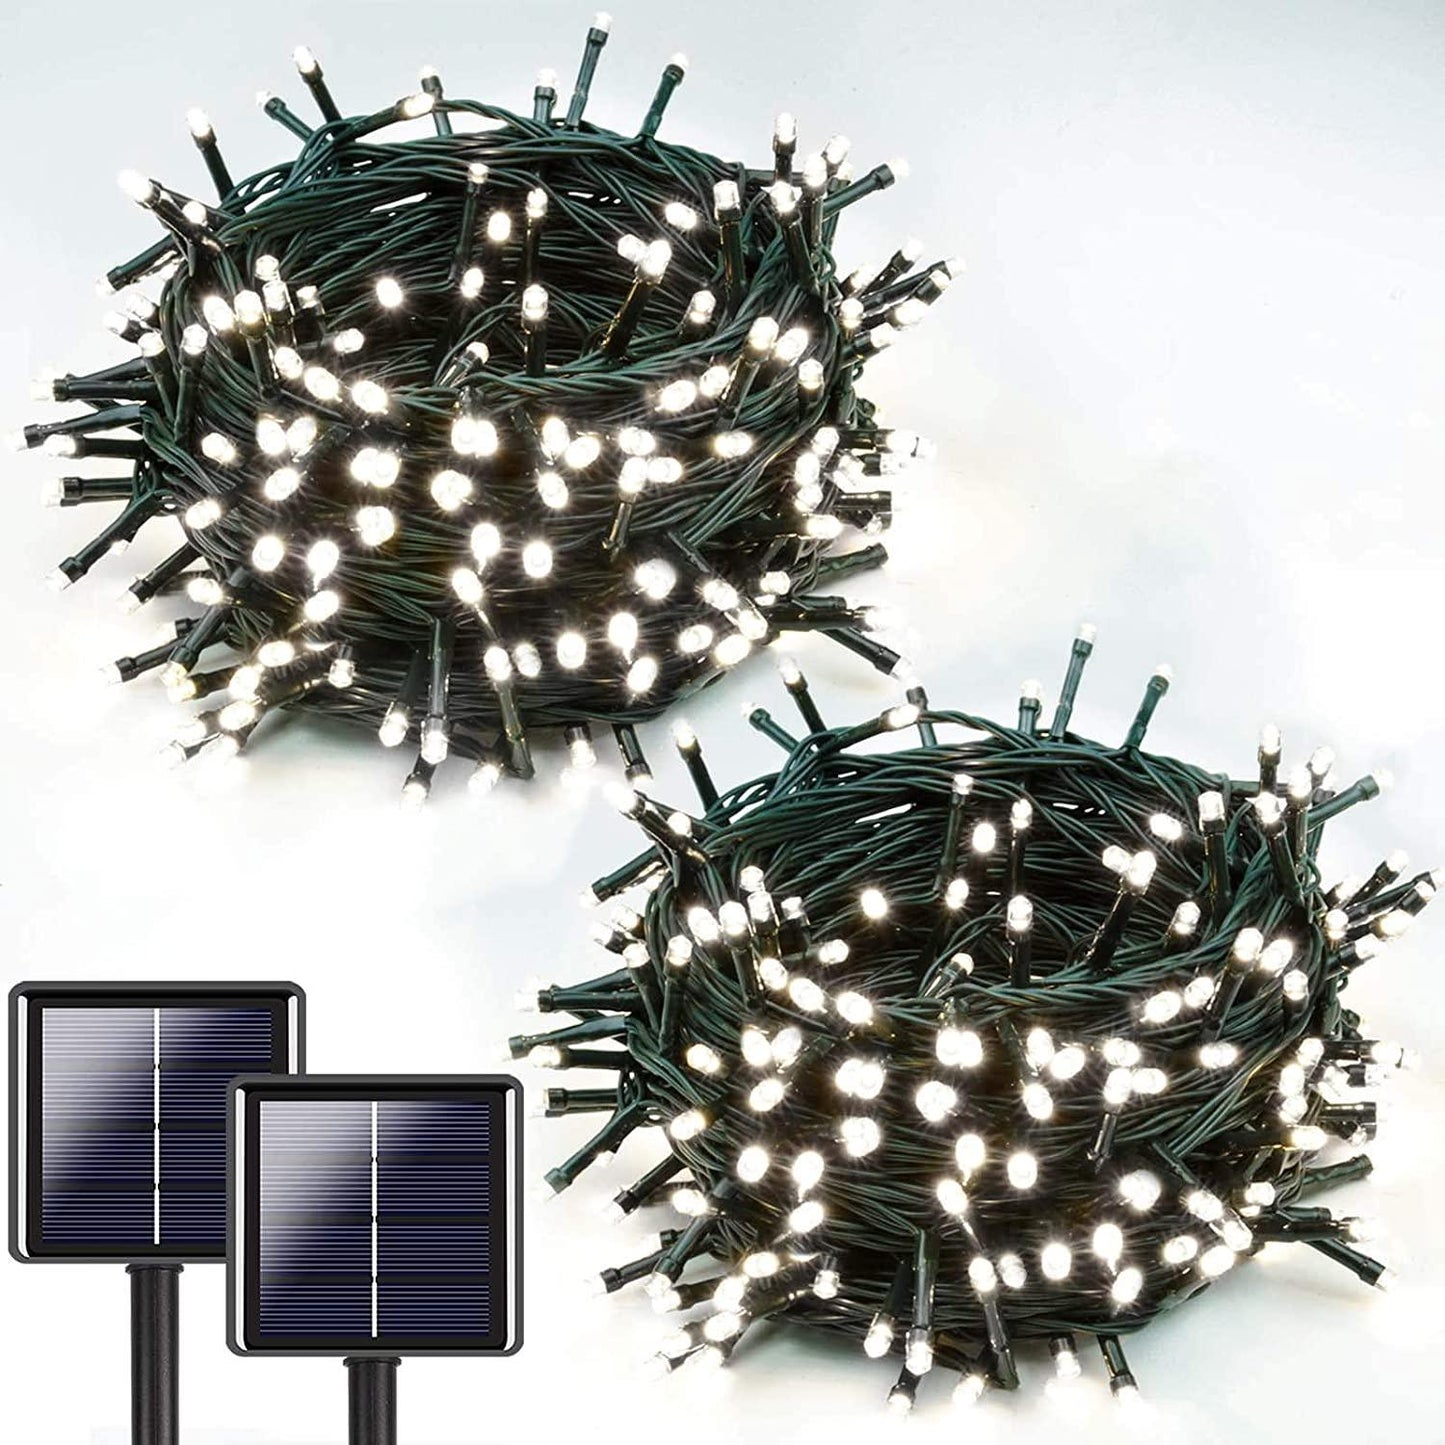 72ft 200 Outdoor LED Solar String Lights, Waterproof 8 Modes Solar Tree Lights for Garden Party Halloween Decorations - If you say i do